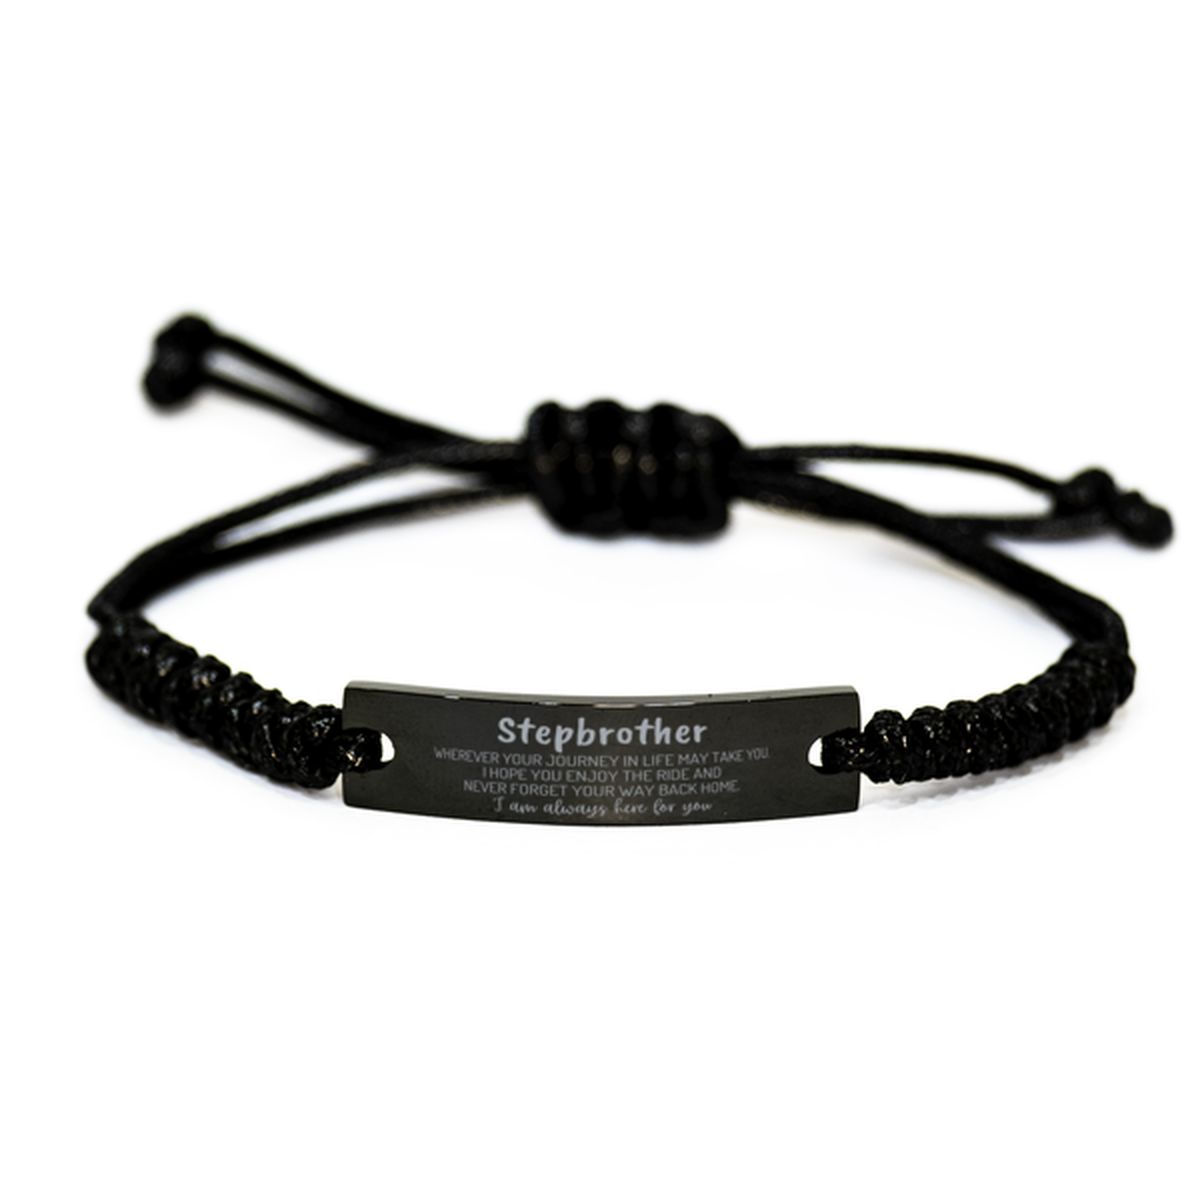 Stepbrother wherever your journey in life may take you, I am always here for you Stepbrother Black Rope Bracelet, Awesome Christmas Gifts For Stepbrother, Stepbrother Birthday Gifts for Men Women Family Loved One